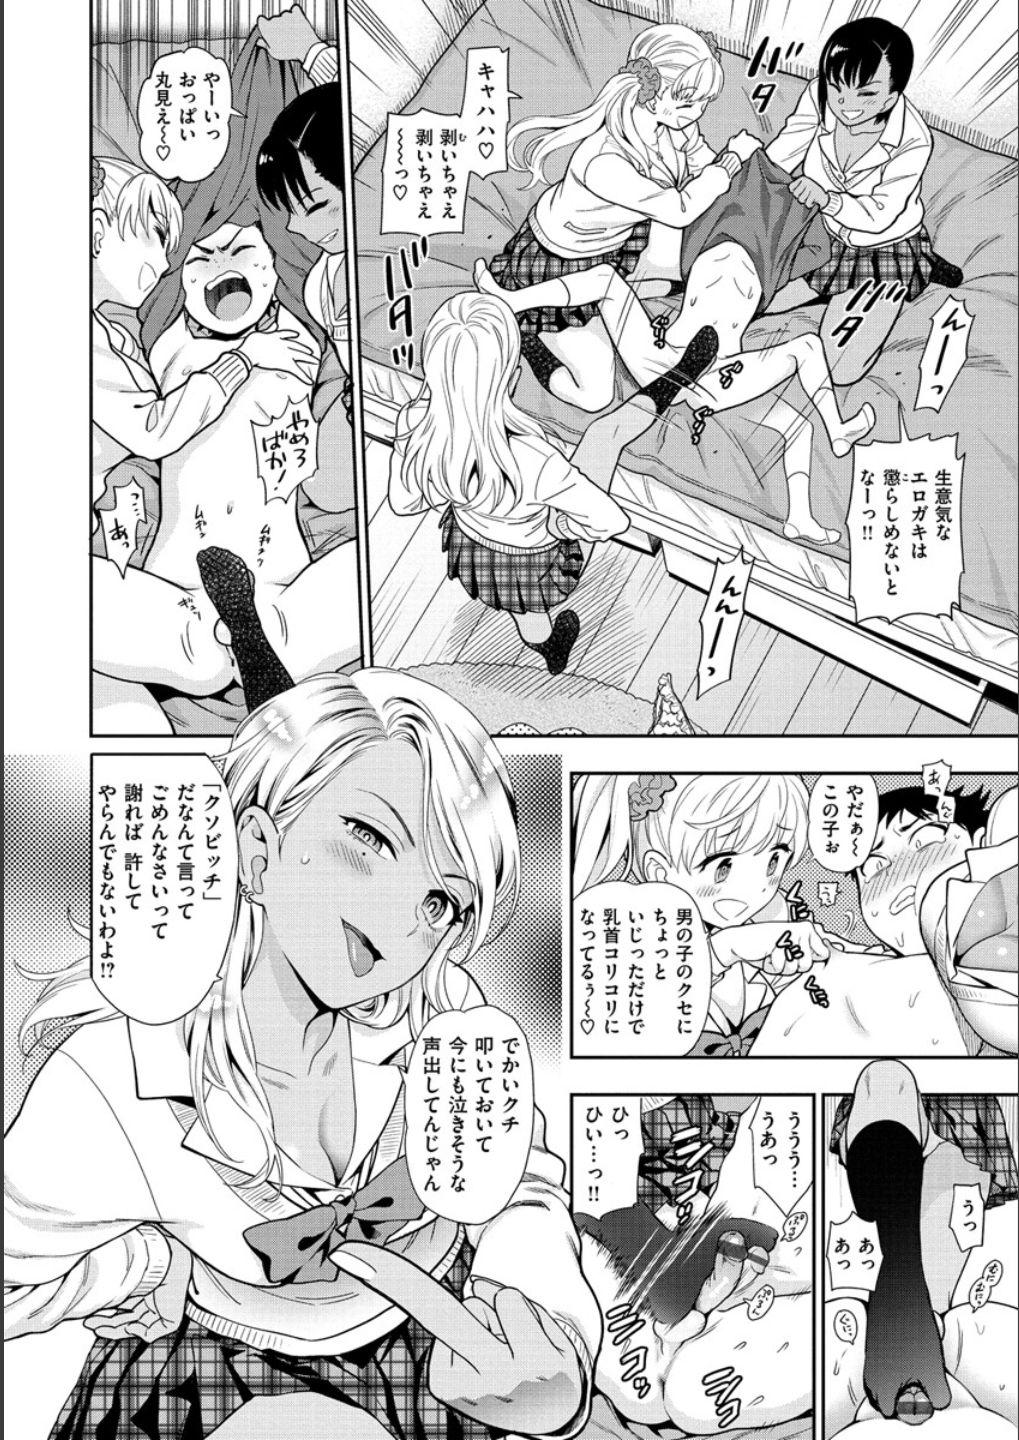 Lesbians Doutei Otouto to Bitch Ane - The cherry boy with Bitch sister. Pack - Page 8